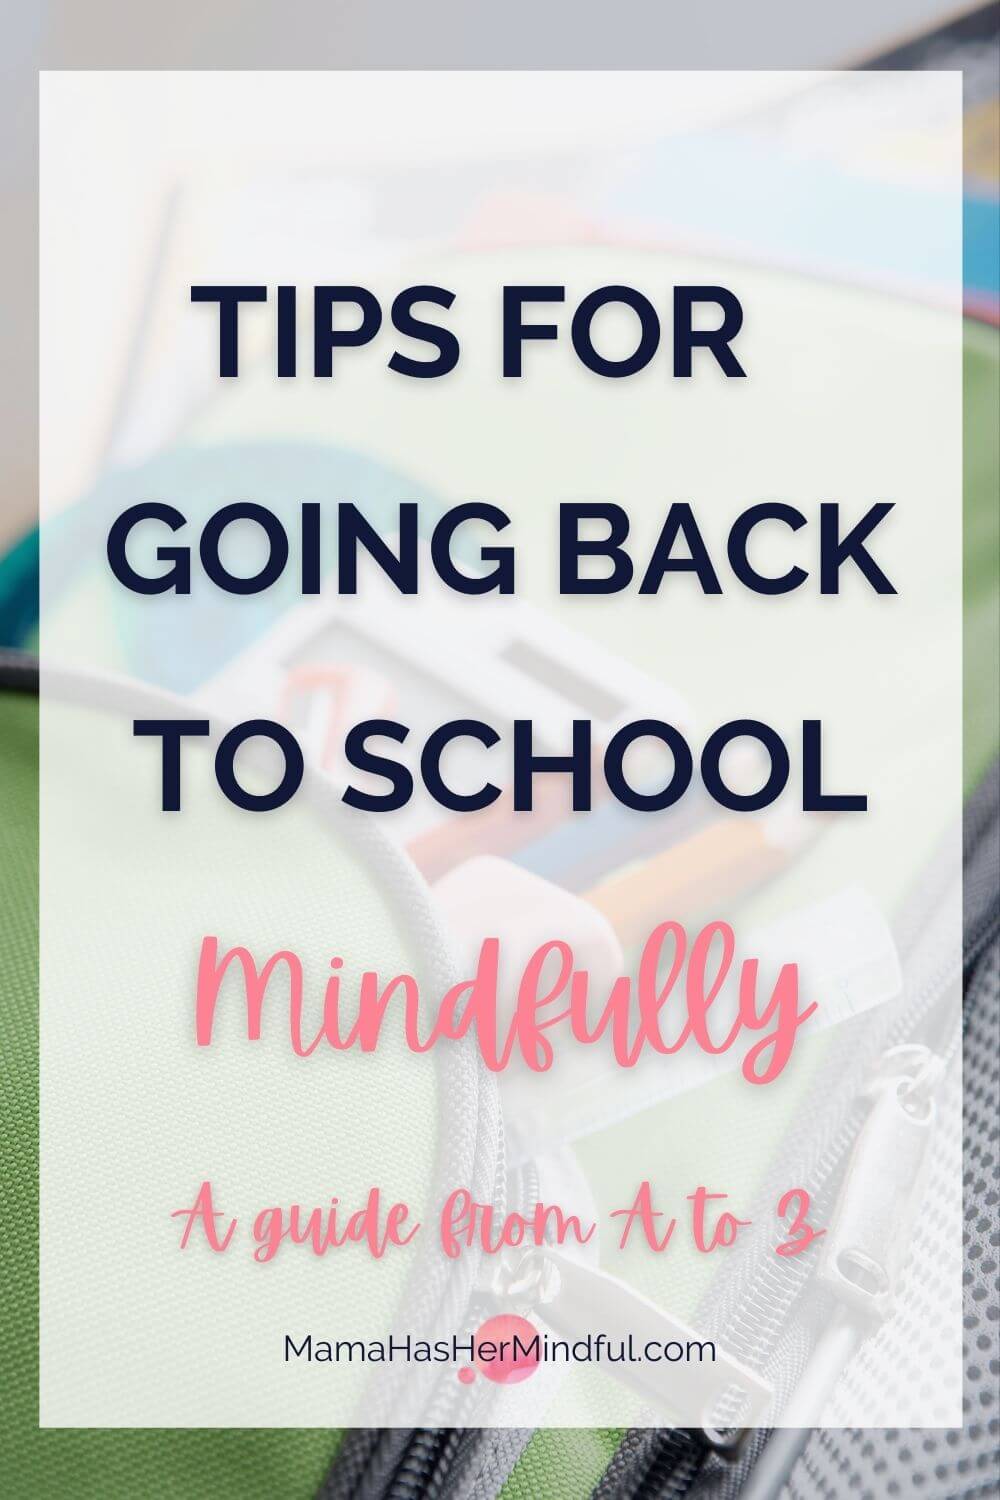 Going Back to School Mindfully in 2021: What You Need from A to Z